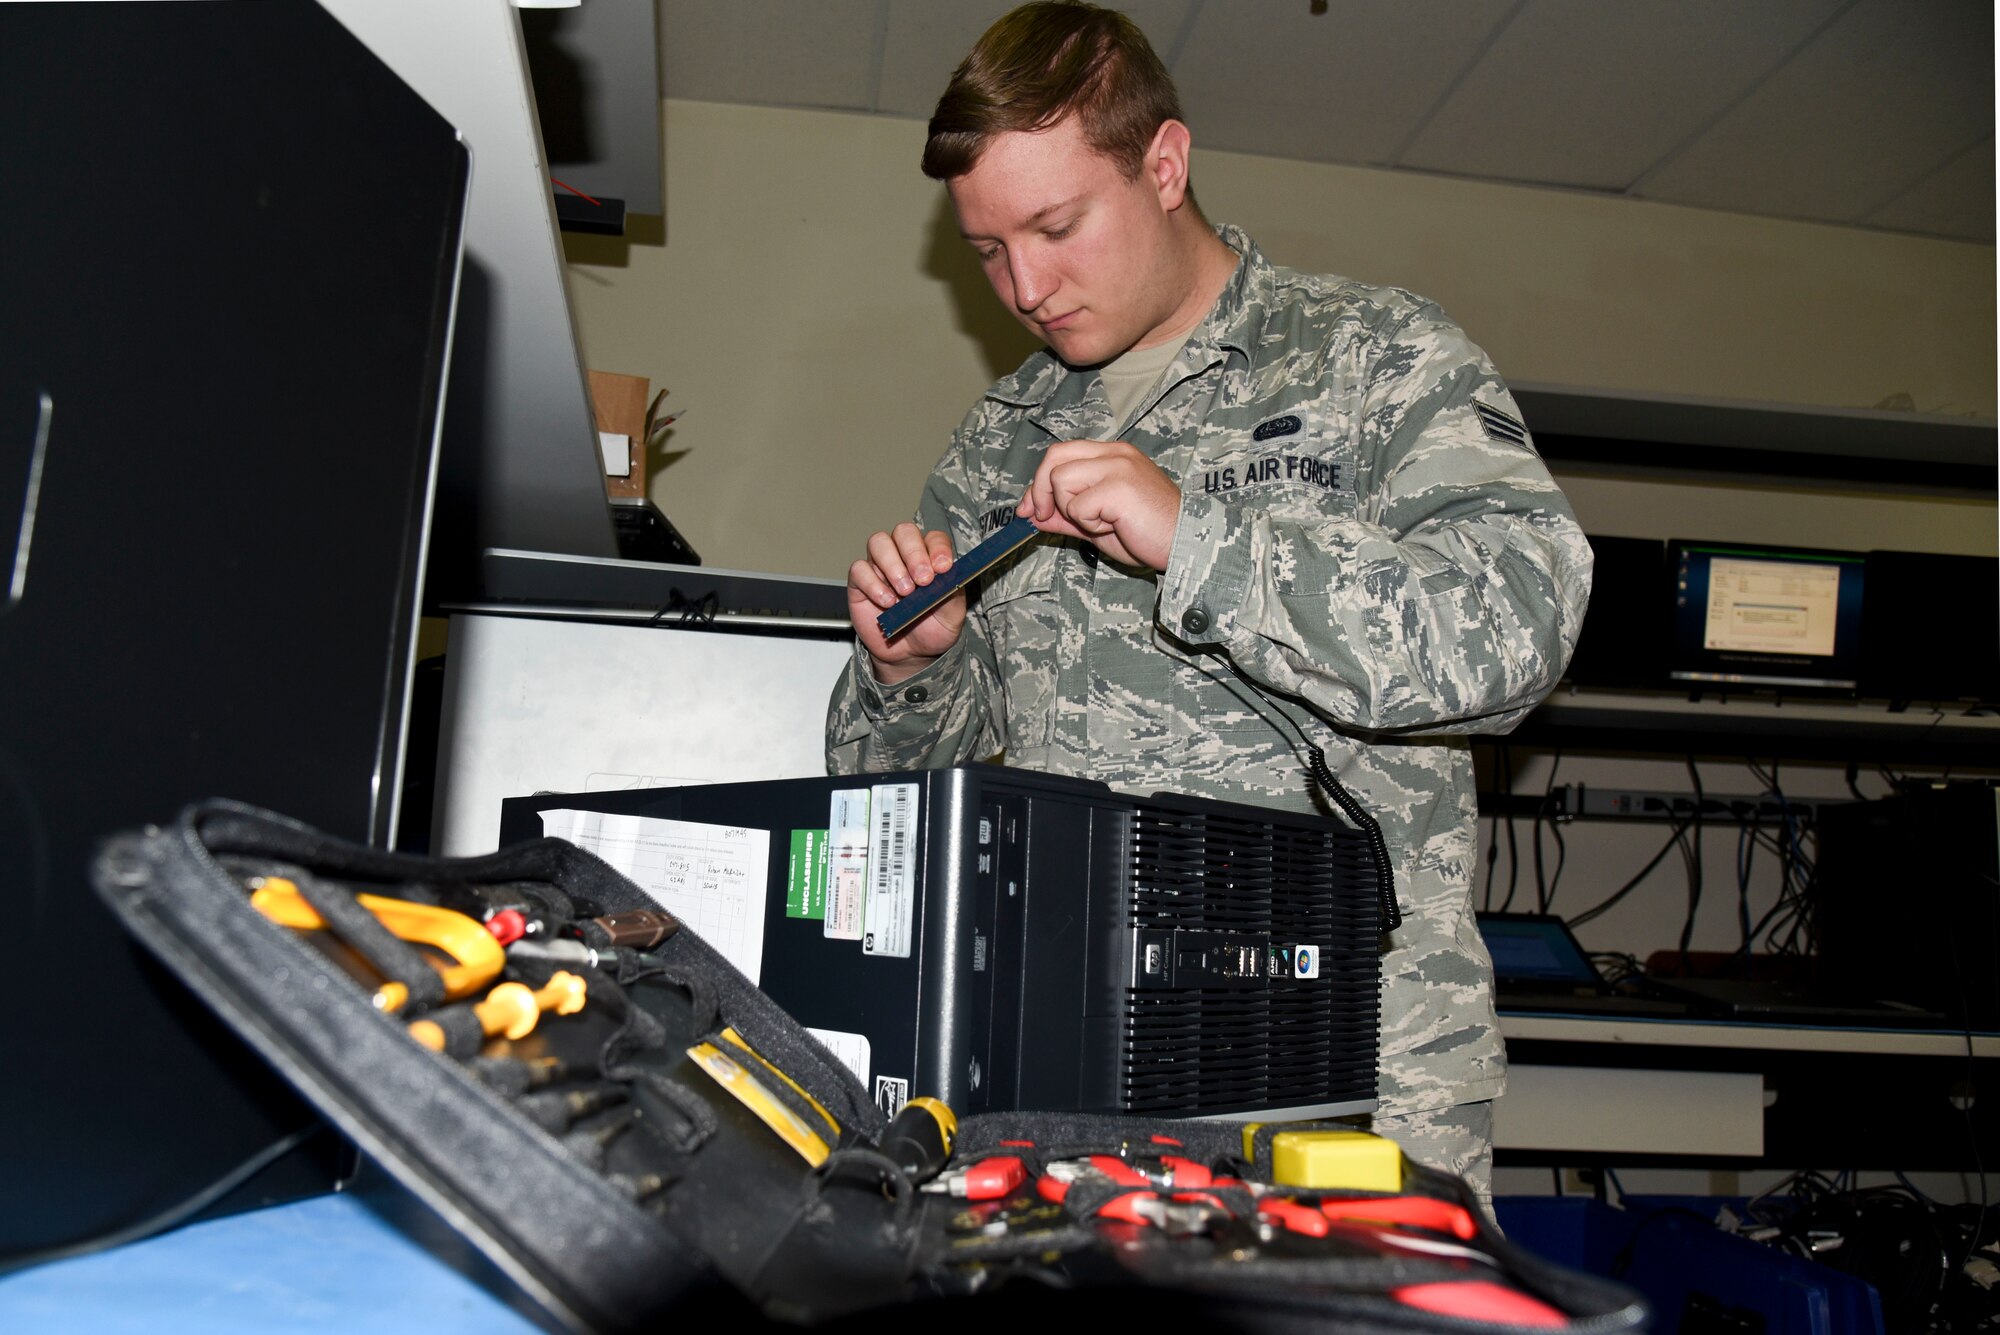 Senior Airman Bradly Stinger, 92nd Communications Squadron client systems technician, works on a damaged computer Oct. 29, 2015, at Fairchild Air Force Base, Wash. Airmen from the 92nd CS create a safe, secure and resilient cyber environment for personnel on base to be able to perform the mission successfully. Without a client systems team ensuring computers and printers are working properly, base personnel won't be able to accomplish their jobs, Stinger said. (U.S. Air Force photo/Senior Airman Janelle Patiño)